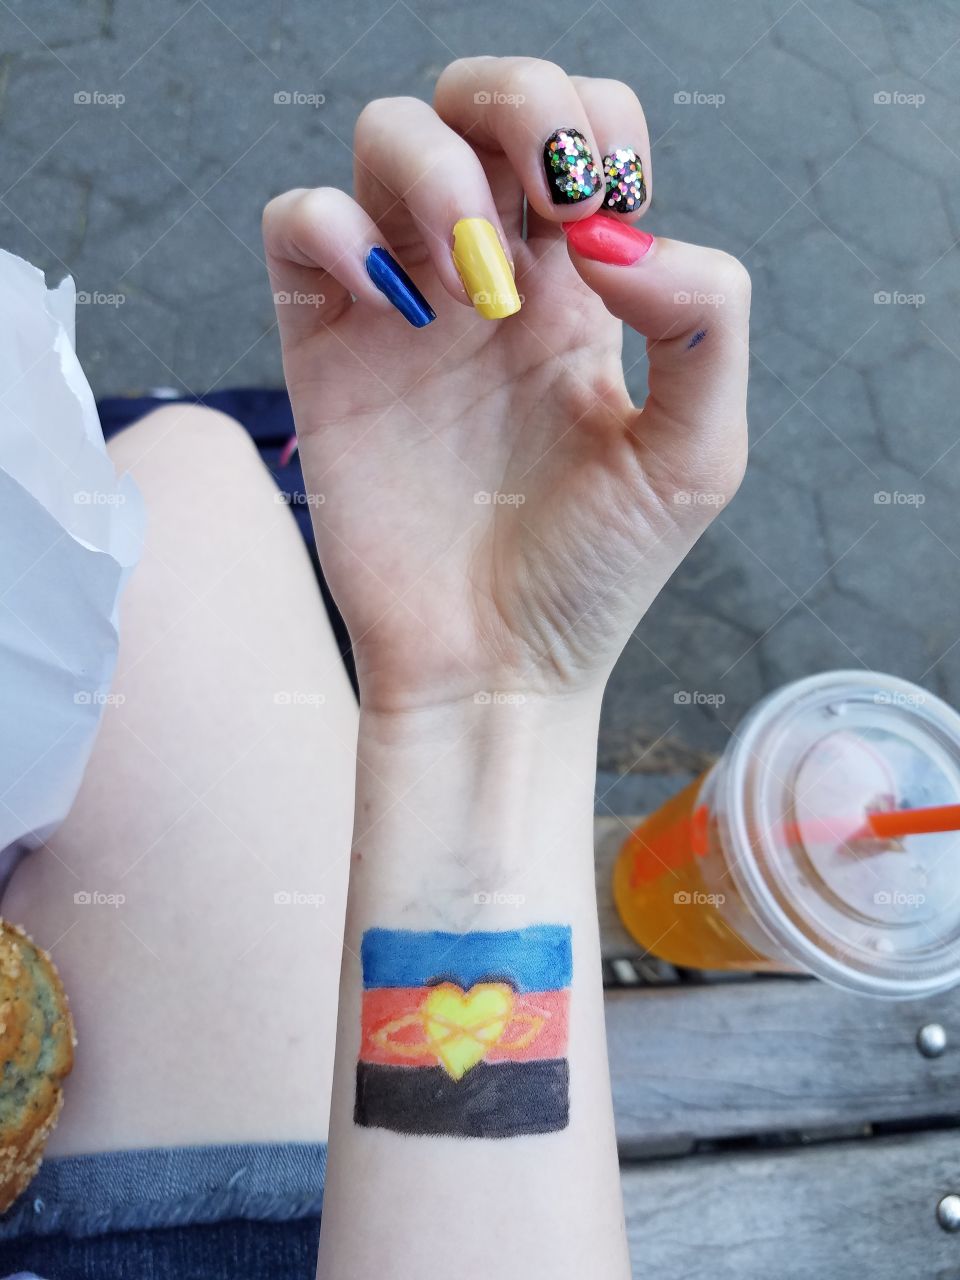 Pansexual sapphic nails with polyamorous art